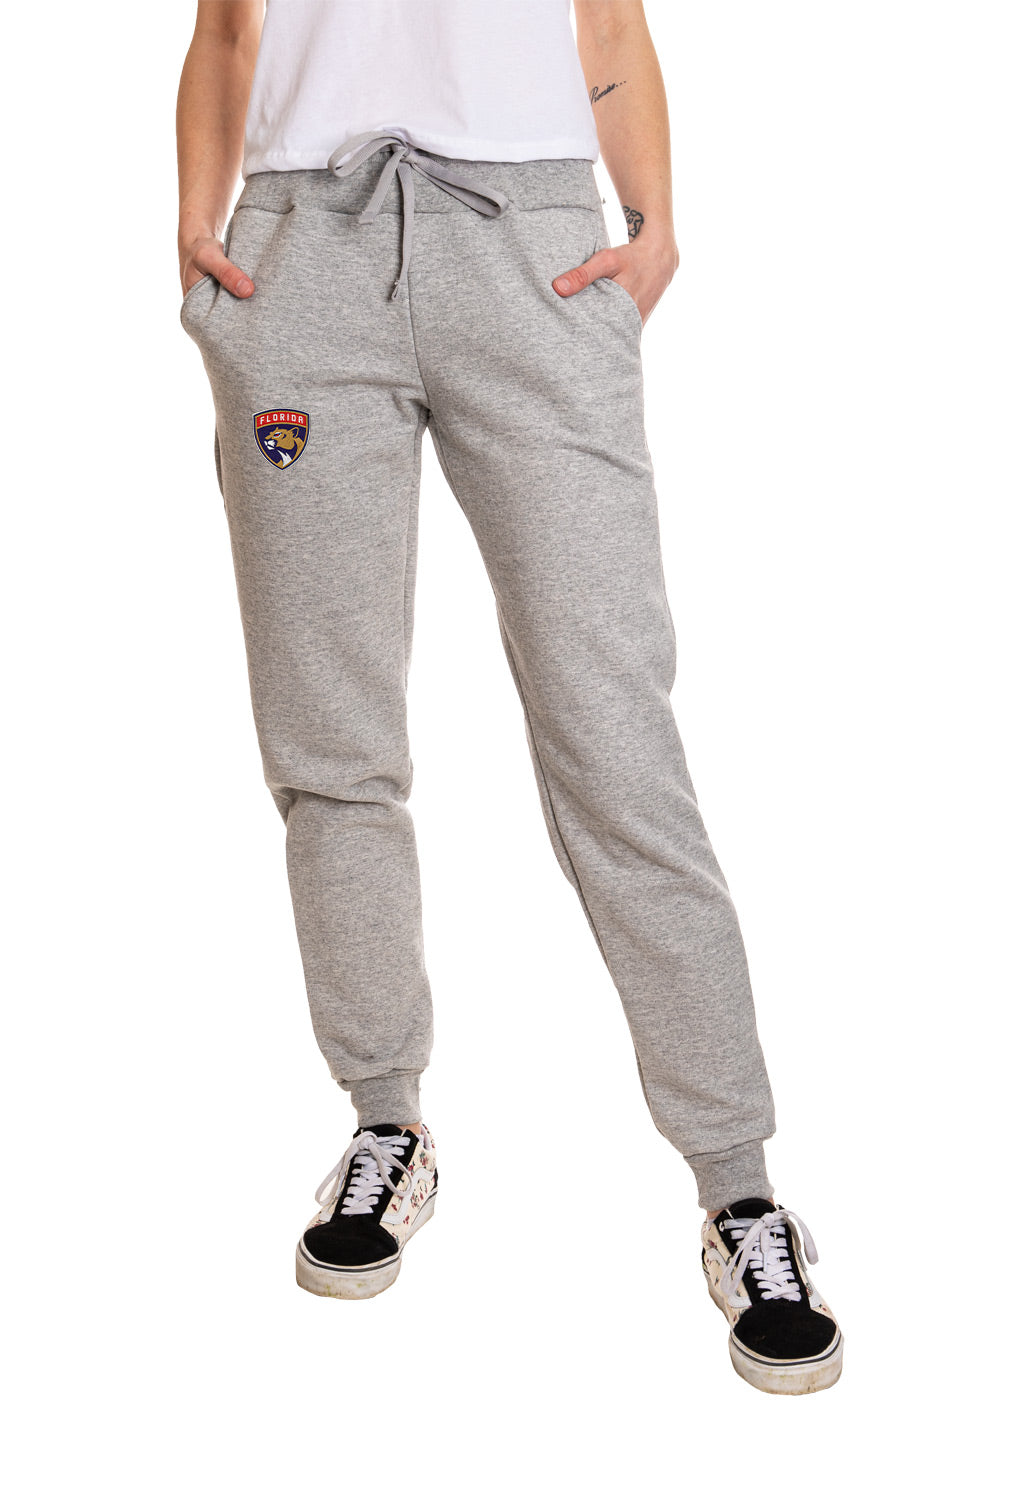 Florida Panthers Ladies Cuffed Jogger Style Track Pants